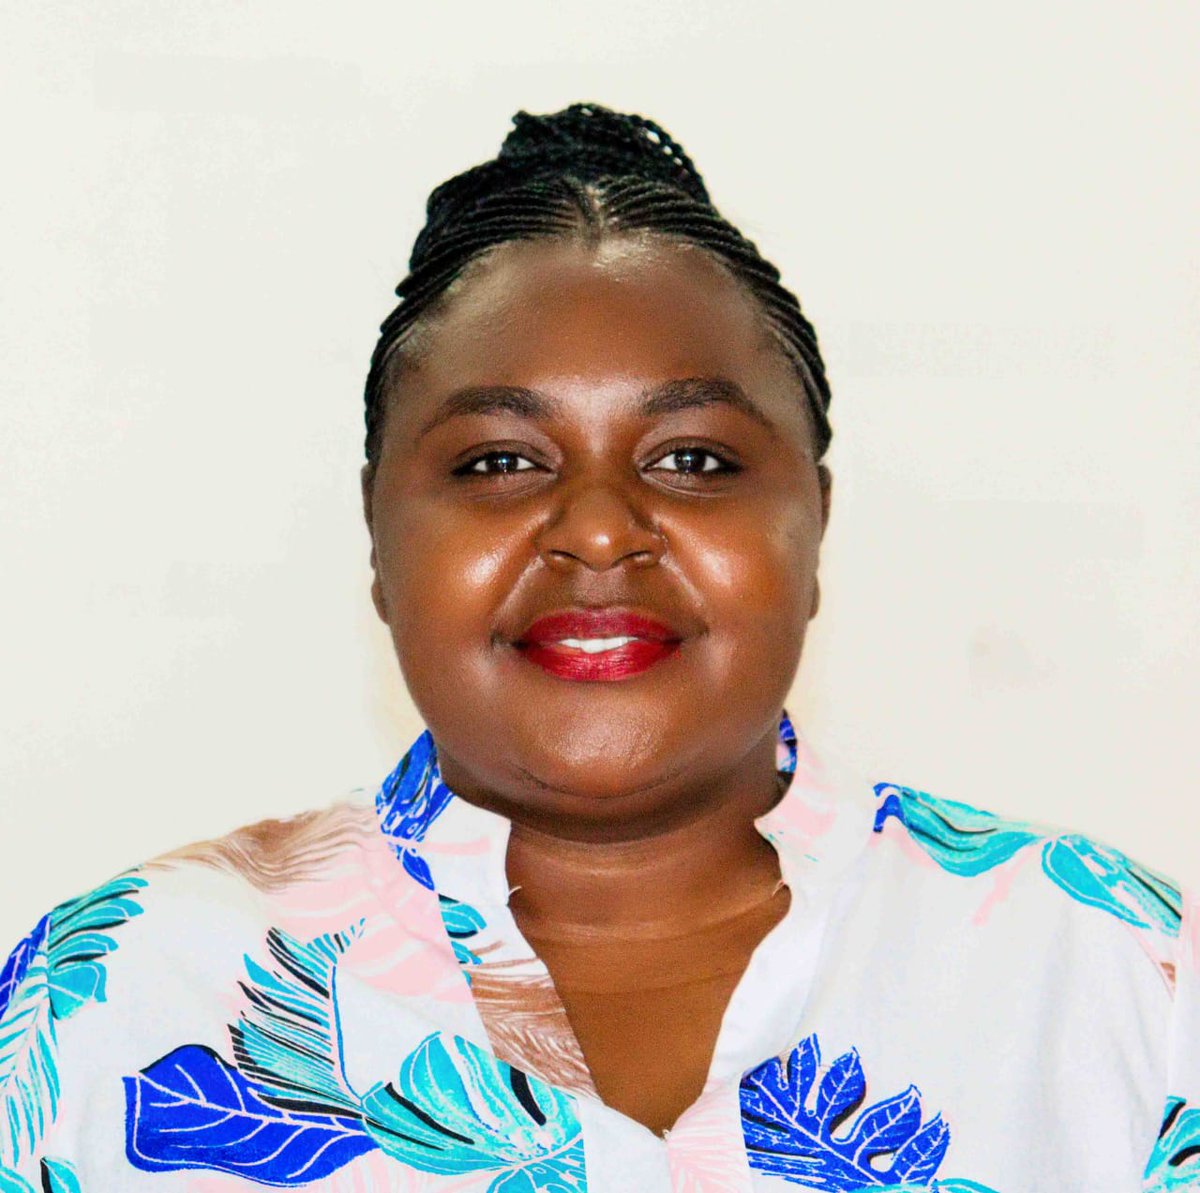 🚨END OF TERM🚨 A big thank you to Ms. Wairimu Muchai, our incredible program coordinator! Your dedication and hard work have made a lasting impact on our program. Thank you for serving us well. Wishing you all the best as you embark on new adventures! #UnescoYouthKe